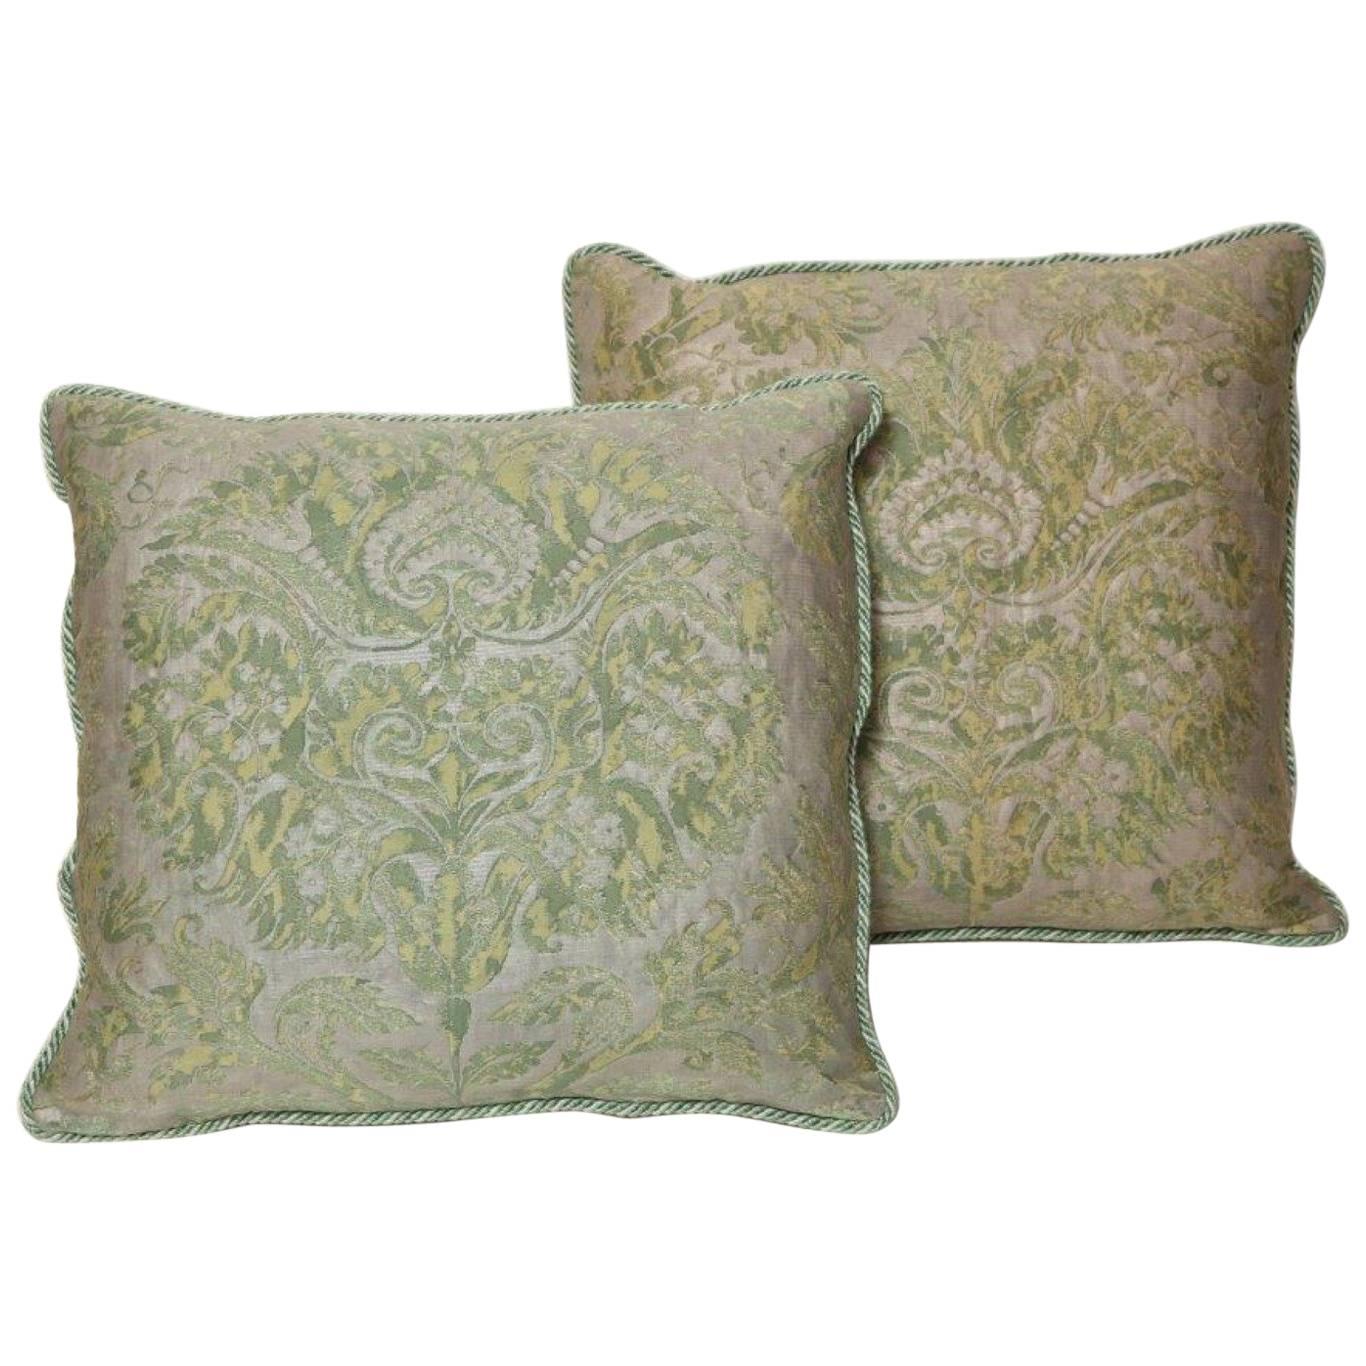 Pair of Fortuny Fabric Cushions in the Demedici Pattern